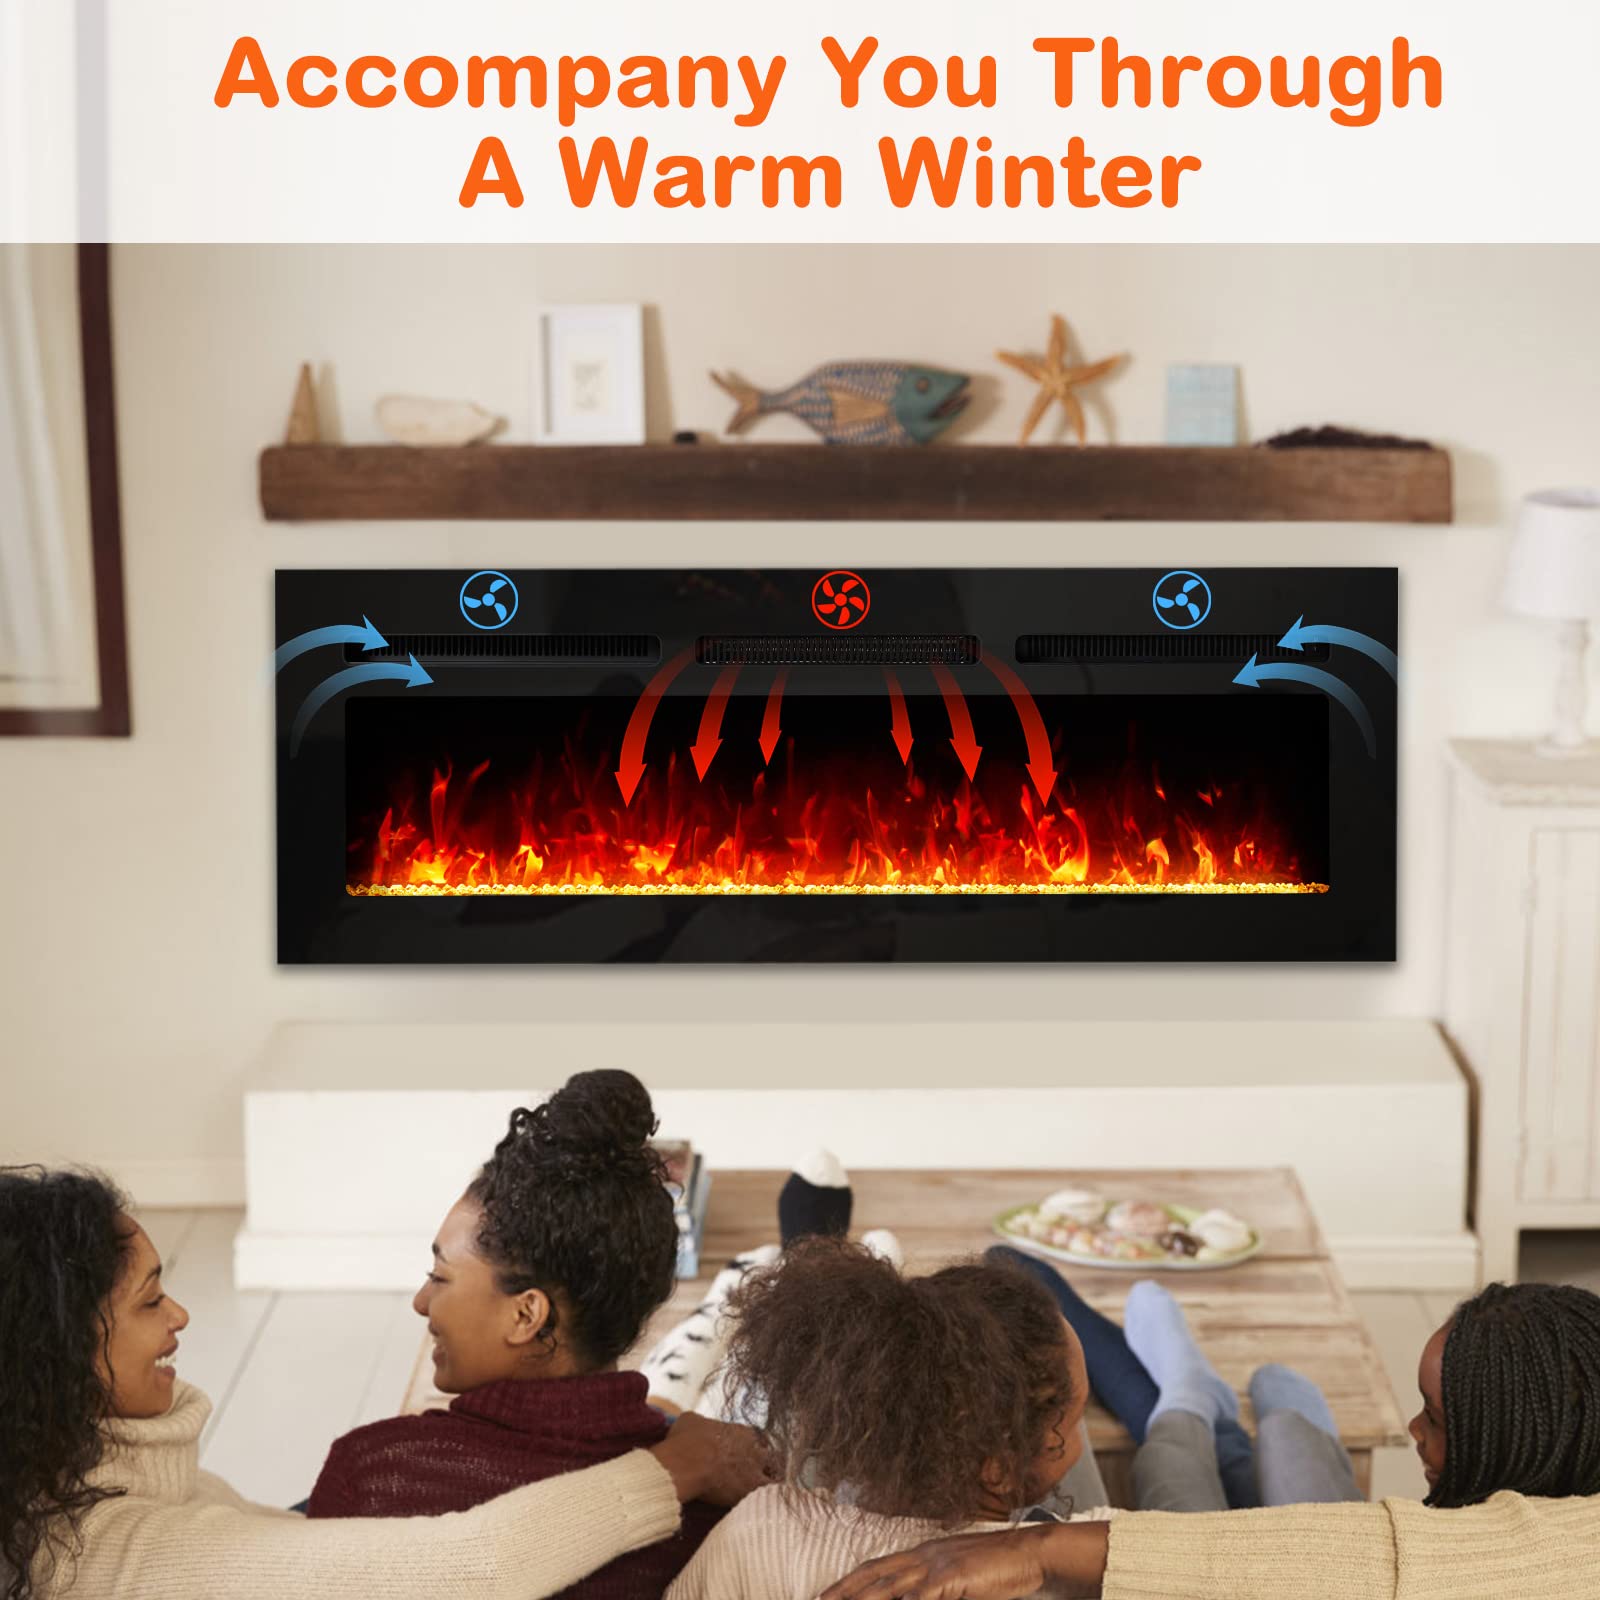 PIONEERWORKS 50 Inch Electric Fireplace Inserts, Recessed and Wall Mounted Electric Fireplace Heater with Wireless Remote Control, 1500W/750W Switch at Will,12 Flame Color Adjustable